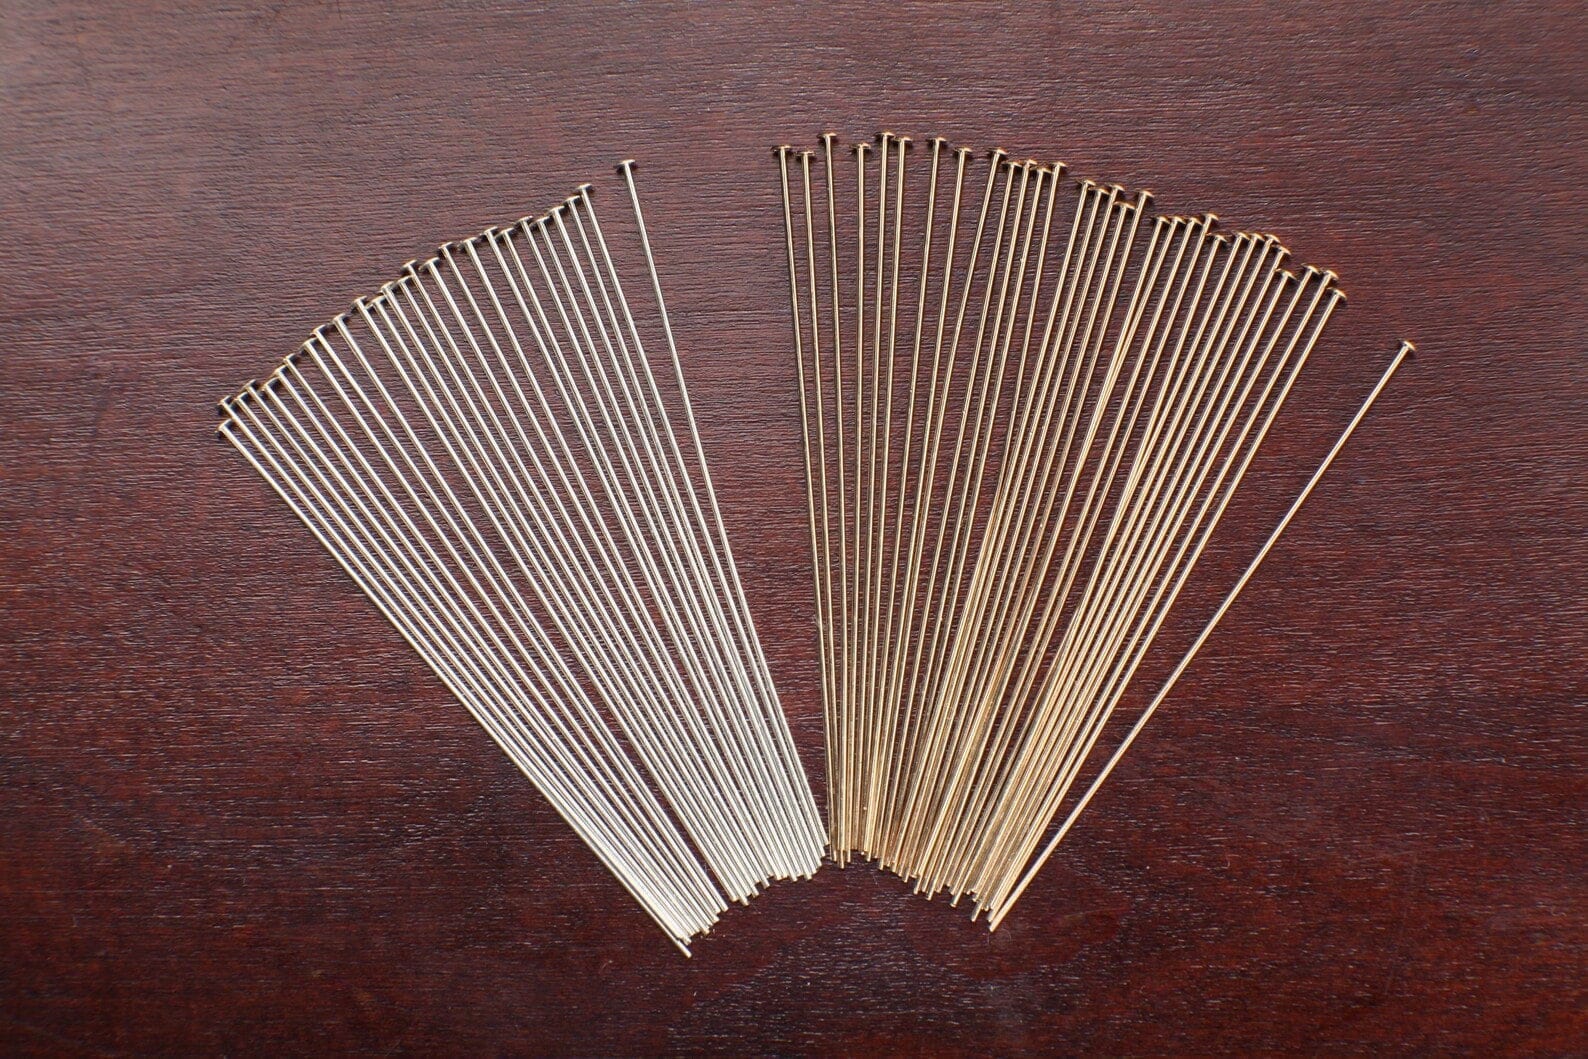 26 Gauge 925 Sterling Silver and 14K Gold Filled Head Pin for Jewelry Making Supplies. Made in USA